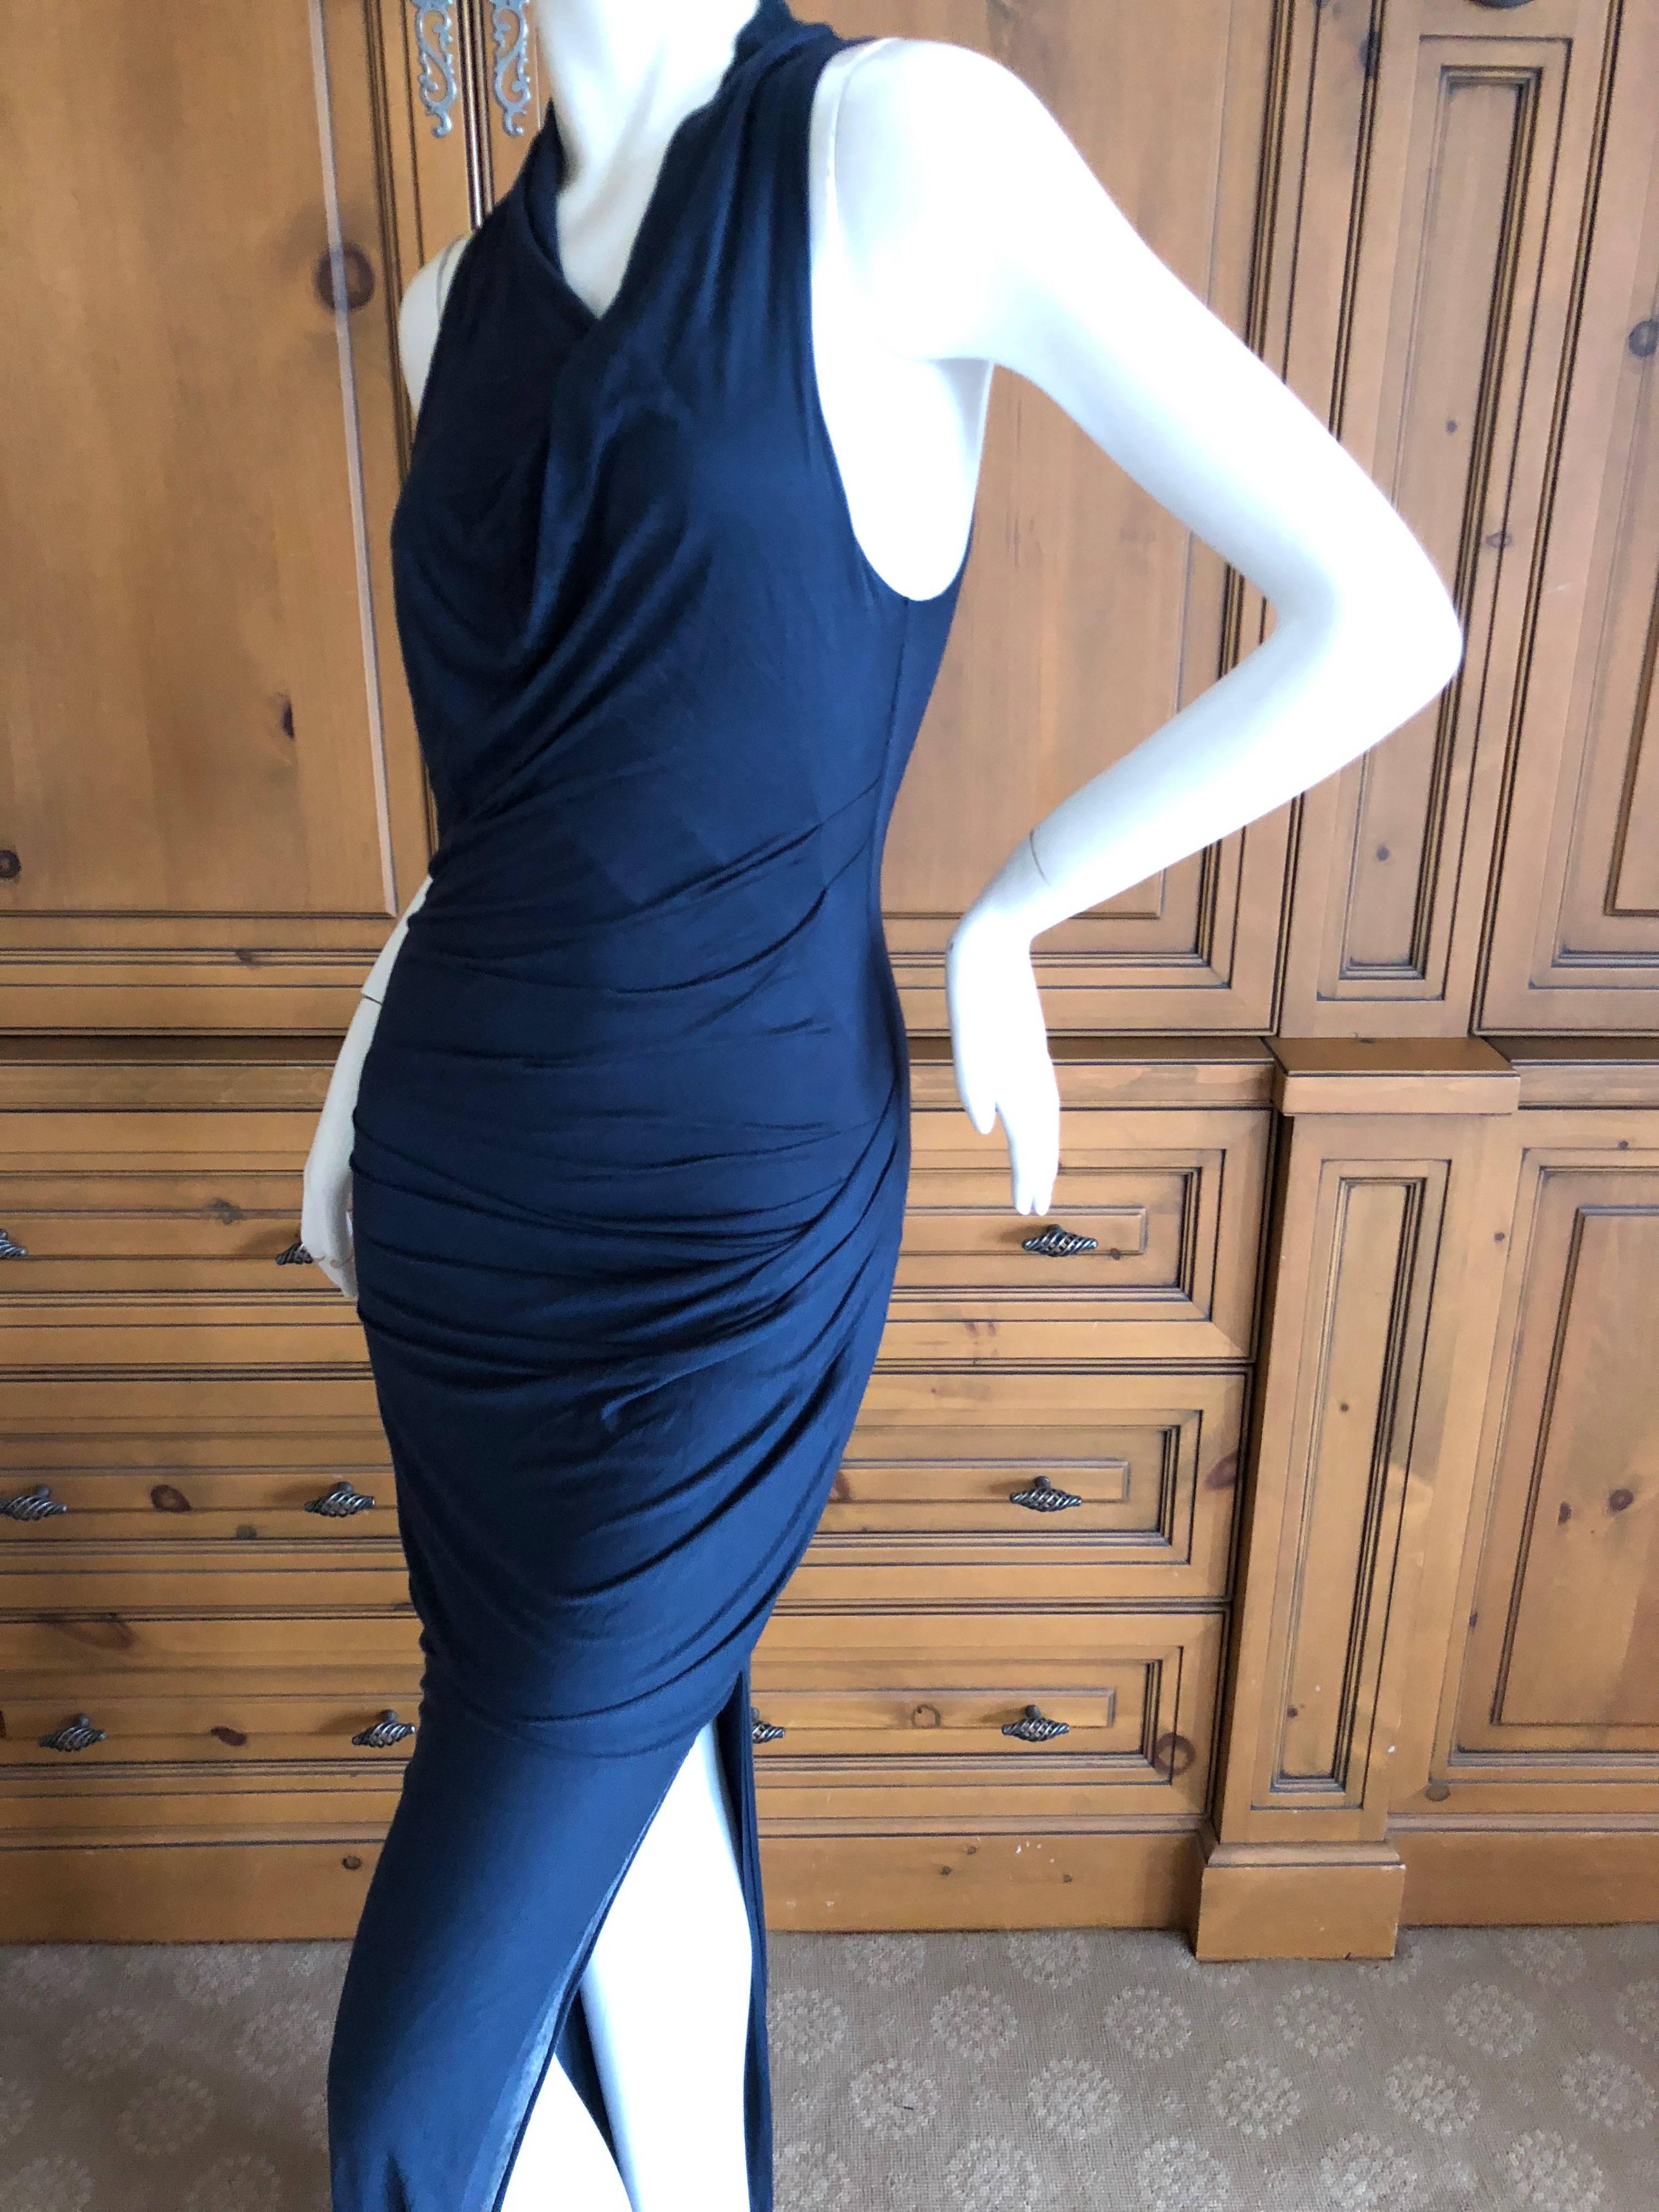 
Vintage Navy Blue Side Slit Jersey Evening Dress  from Helmut Lang.
There is no size label or fabric tag. 
Appx US size 6
Bust 36